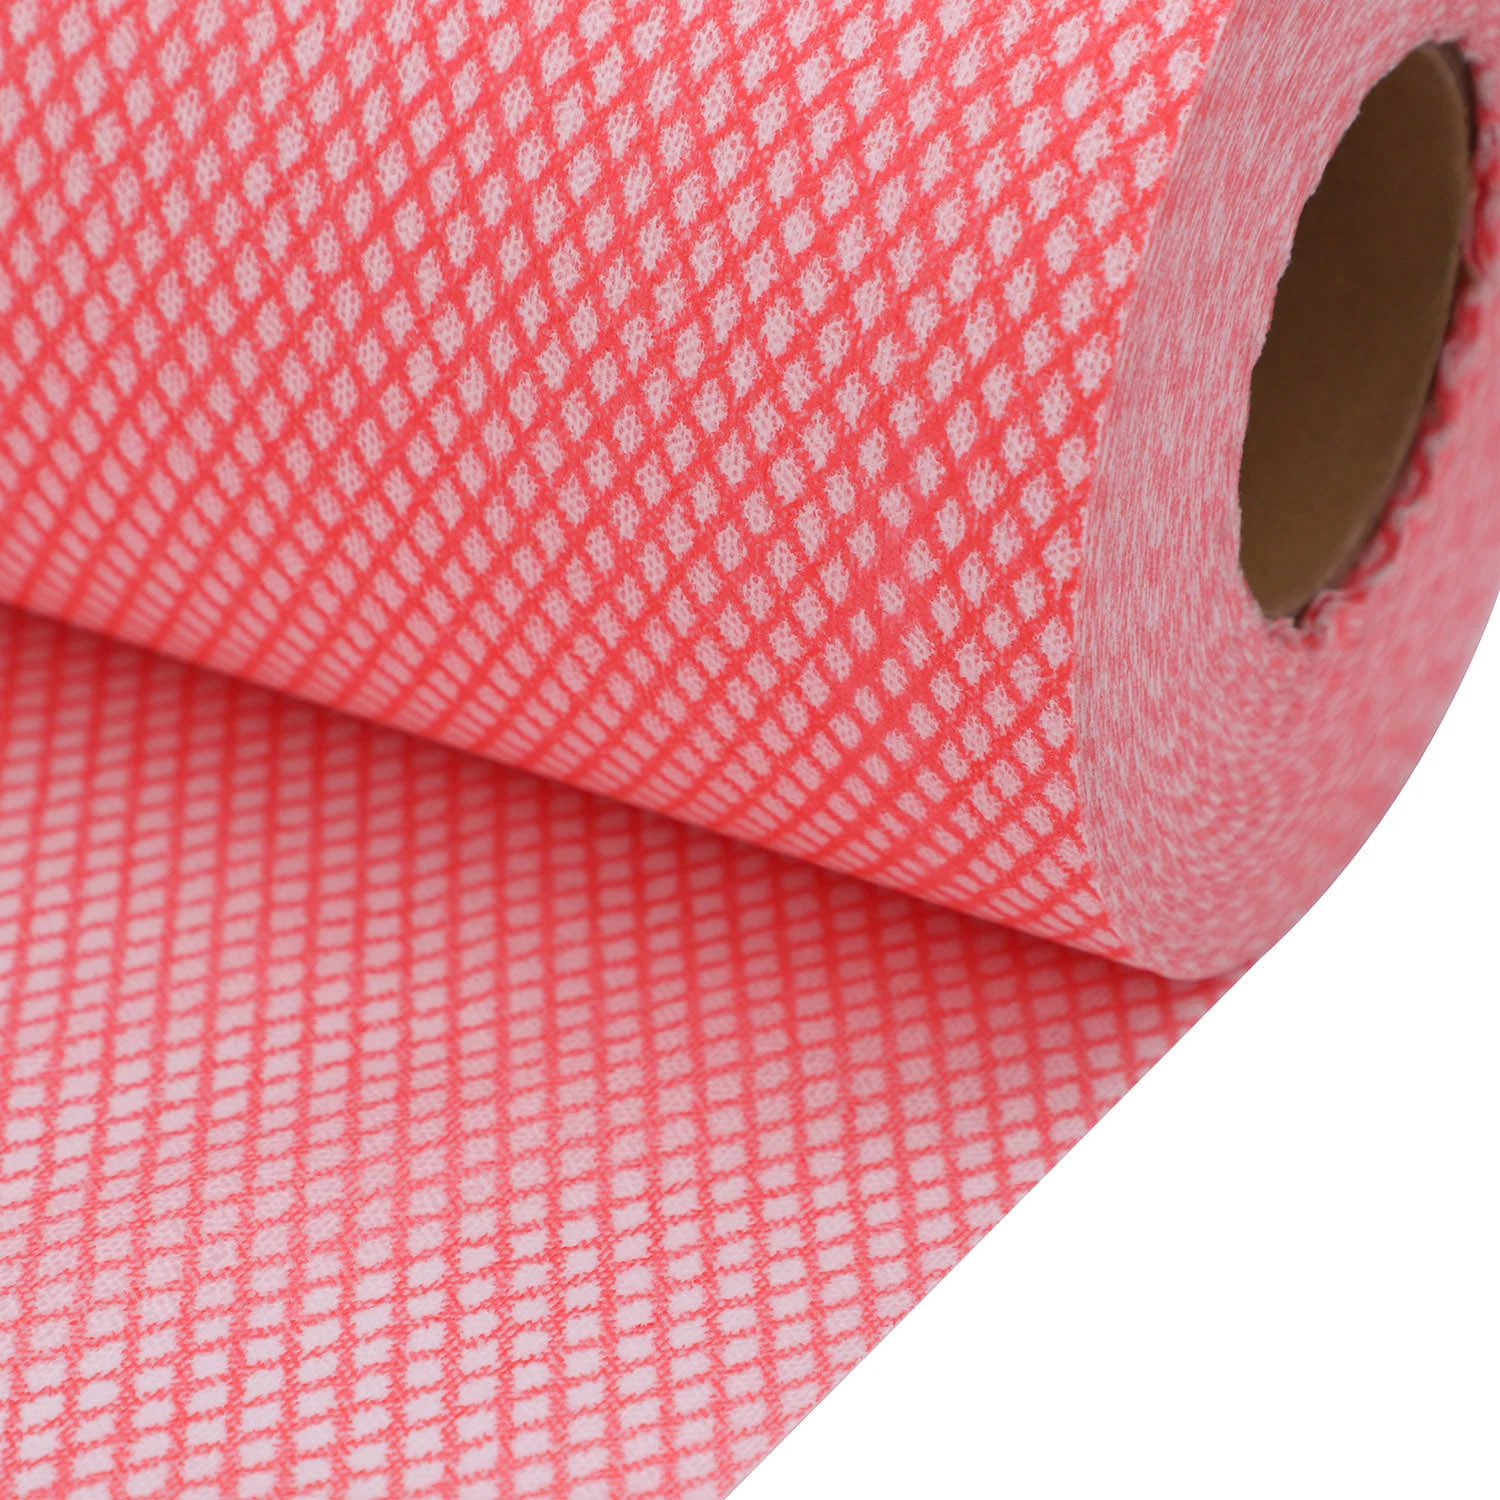 Whole Sale Disposable Dry Household Spunlace Nonwoven Cleaning Kitchen Towel Cloth Materials